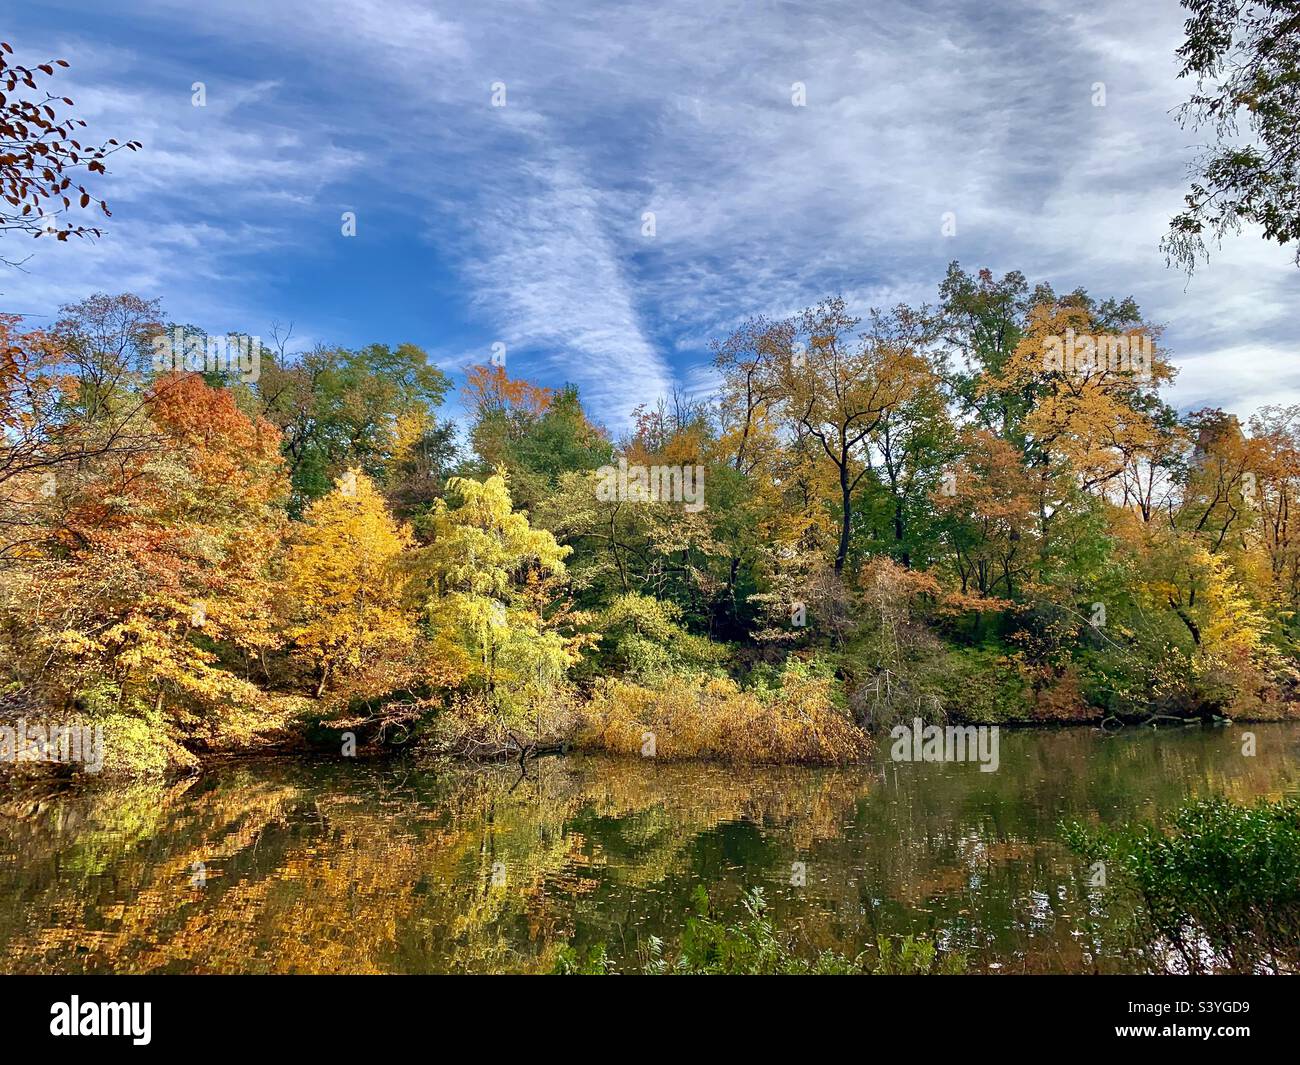 Incredible bright autumn (fall) day in Central Park, Manhattan, New York, USA, the soft golden autumn colours of the trees are reflected in the still clear lake with a blue sky and scattered clouds Stock Photo